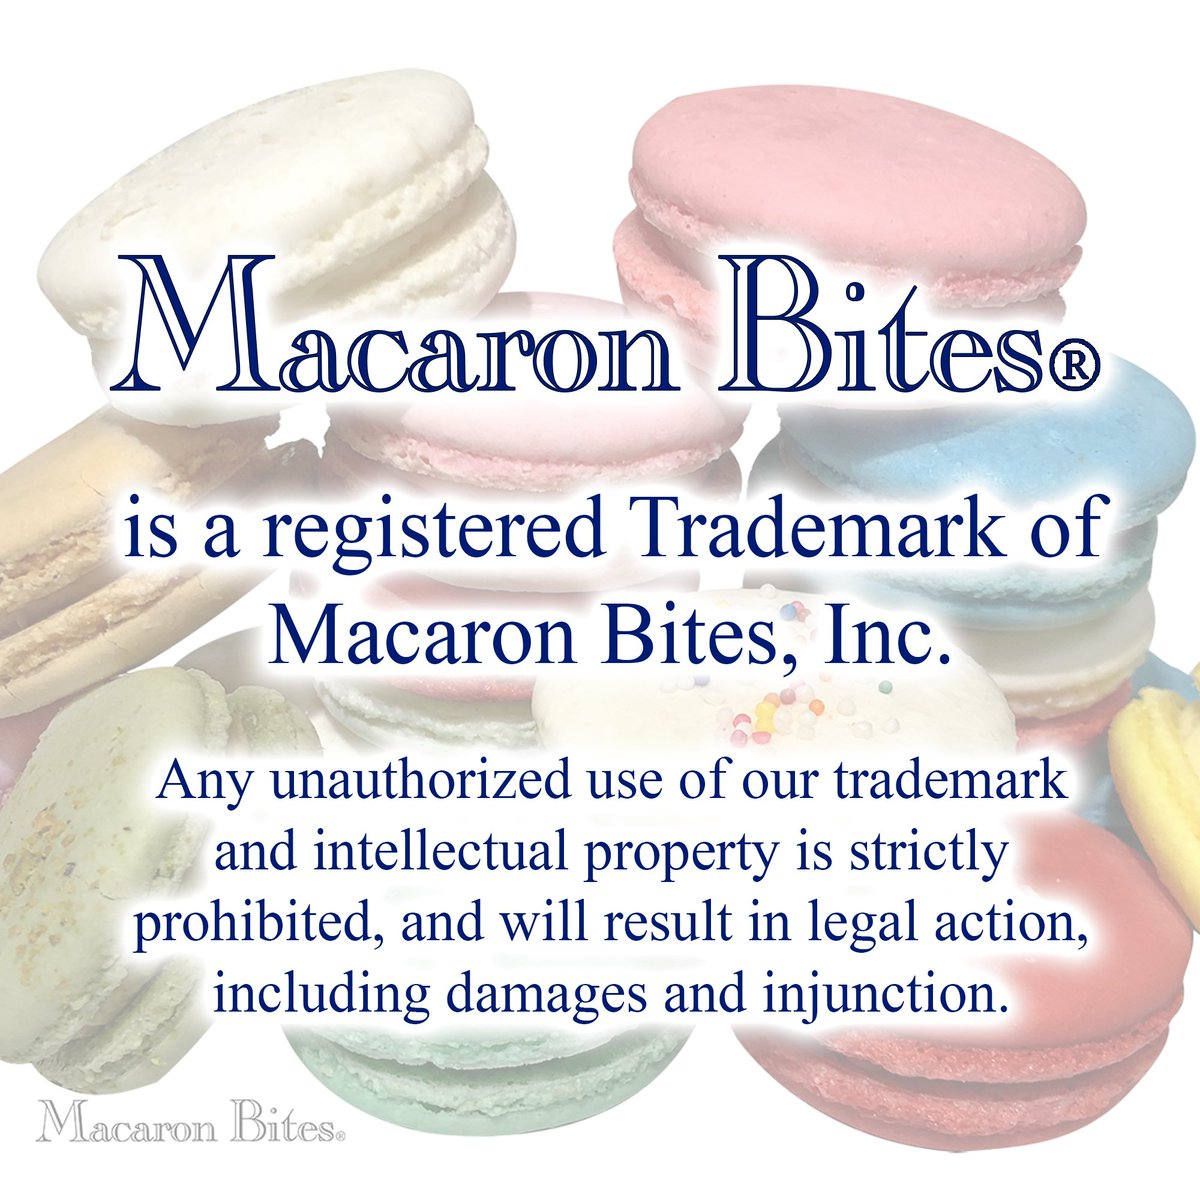 Macaron Bites® is a registered Trademark of Macaron Bites, Inc.  Any unauthorized use of our trademark and intellectual property is strictly prohibited, and will result in legal action, including damages and injunction.  #TrademarkProtection ®️ #MacaronBites 🥮 #LegalNotice ⚖️